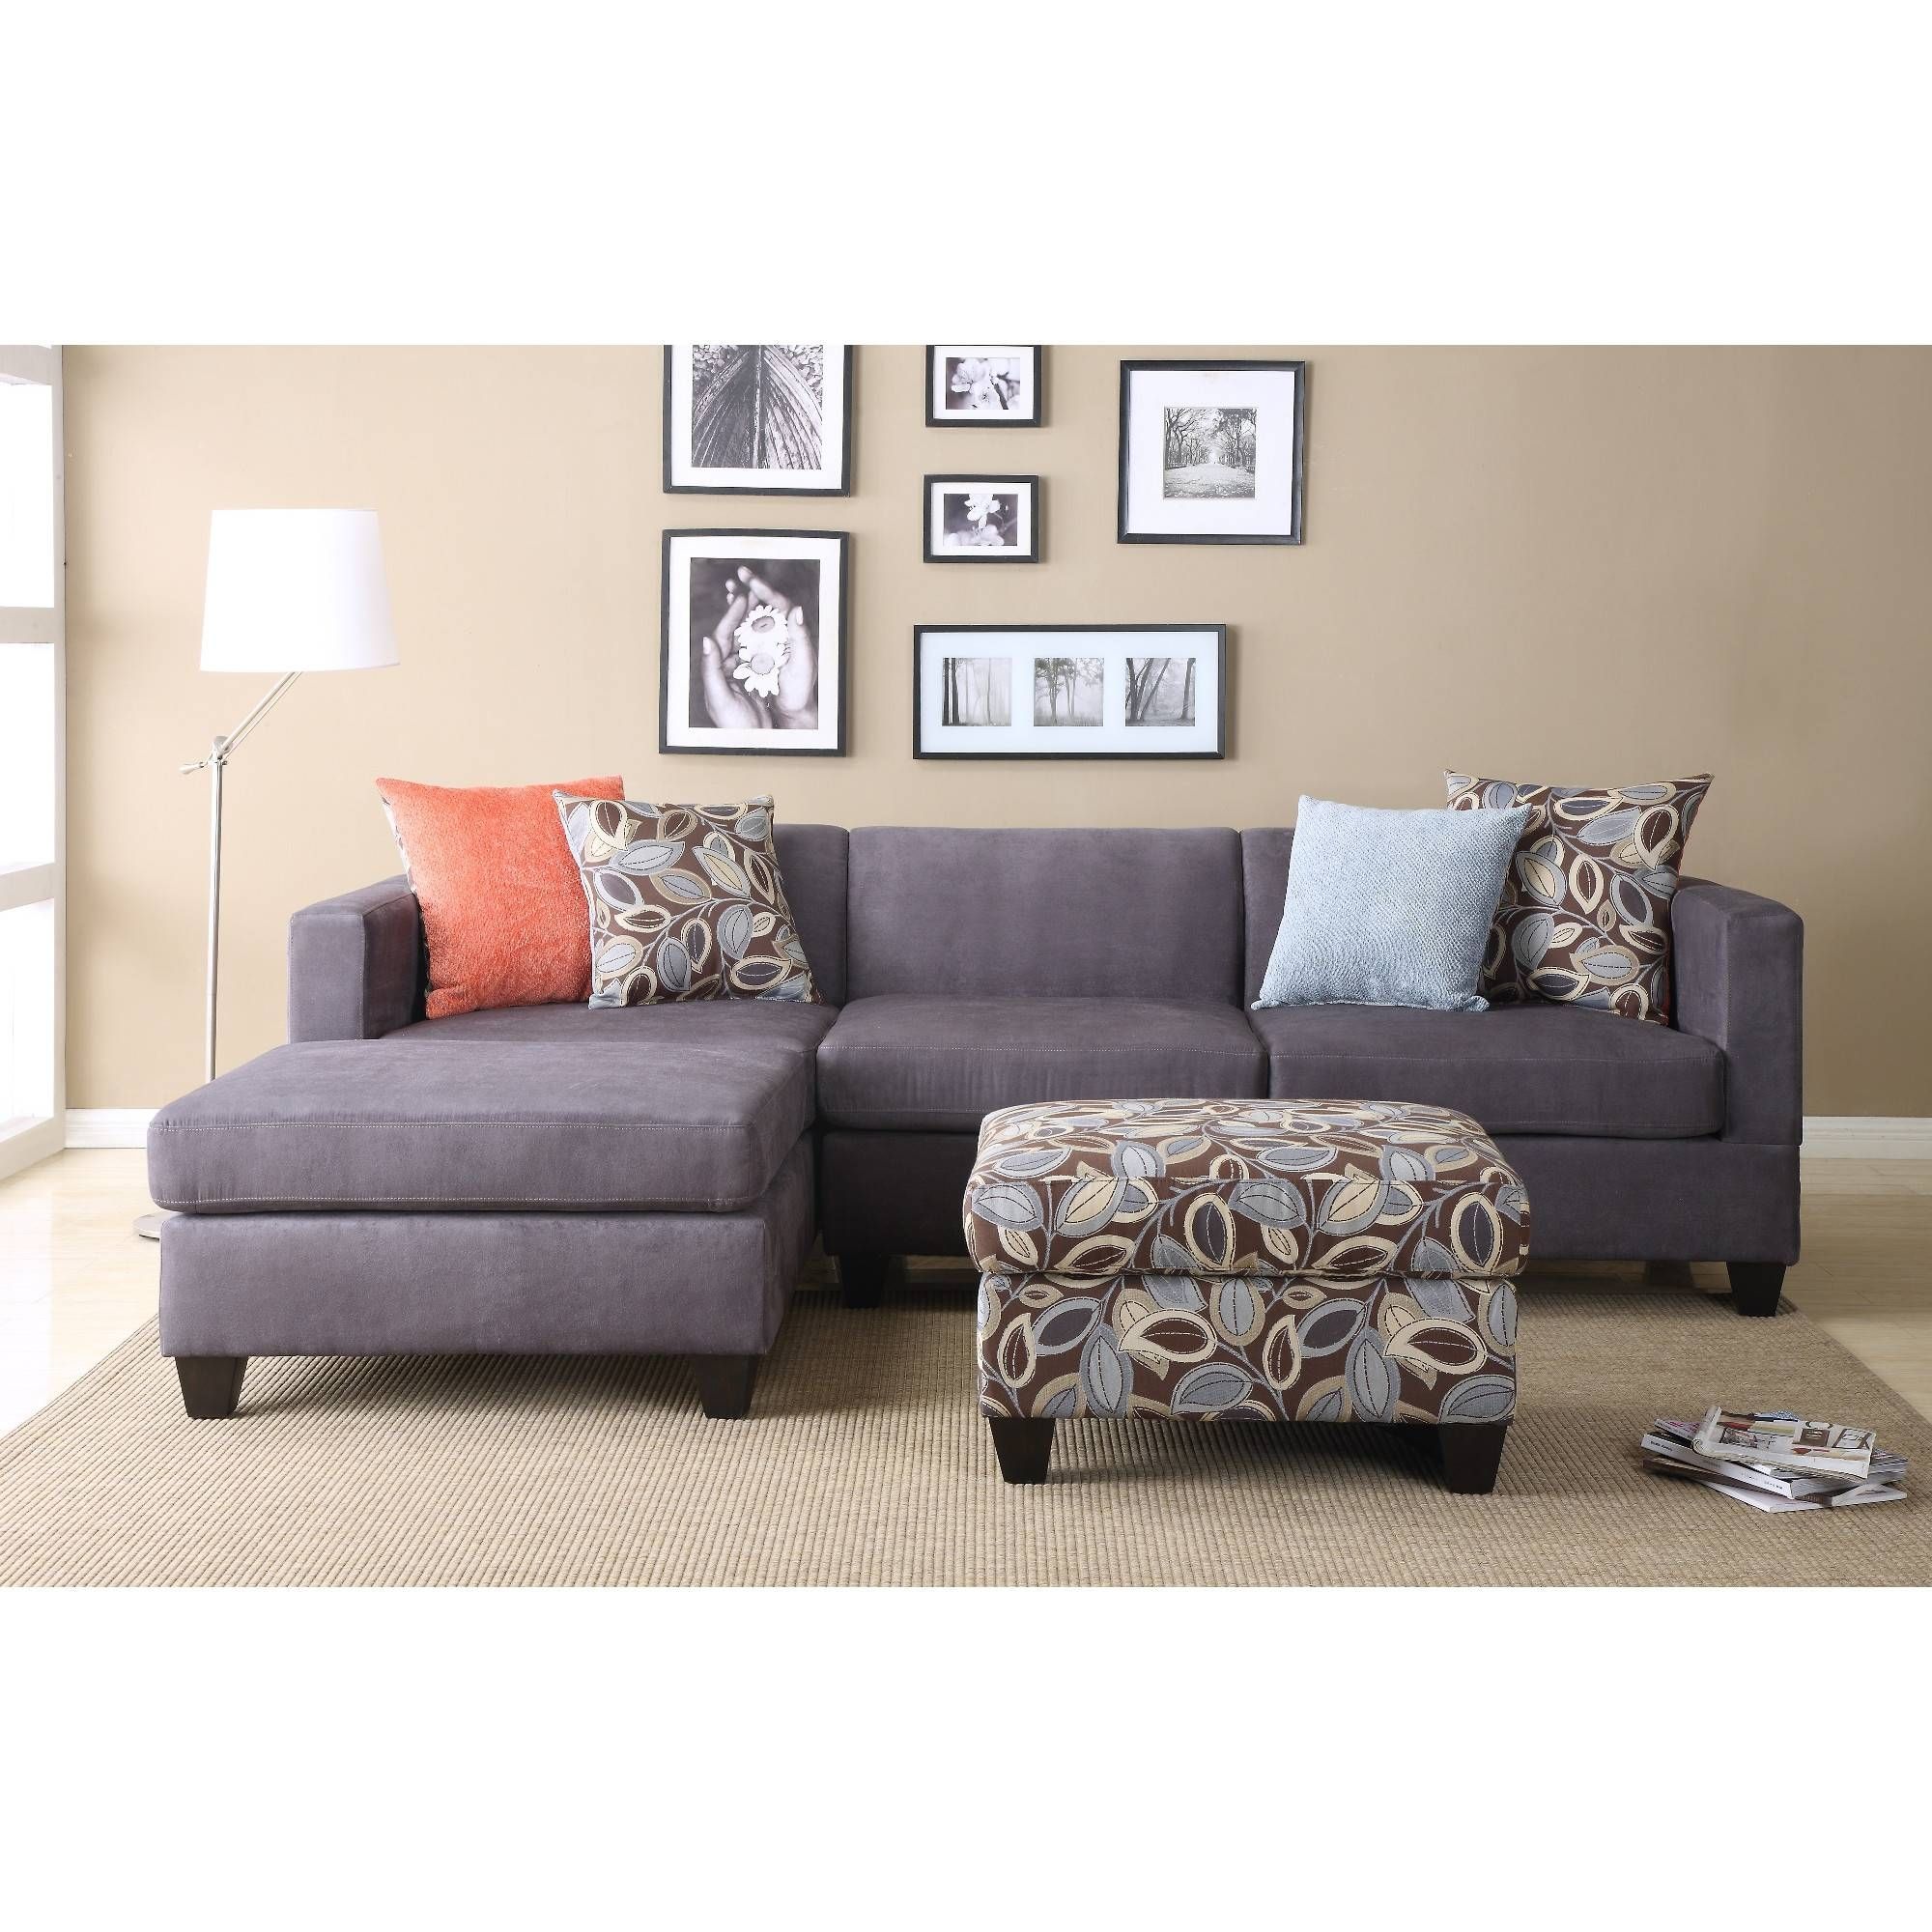 Sofas Center : Singular Cindy Crawford Sectional Sofa Pictures Intended For Cindy Crawford Sofas (Photo 24 of 30)